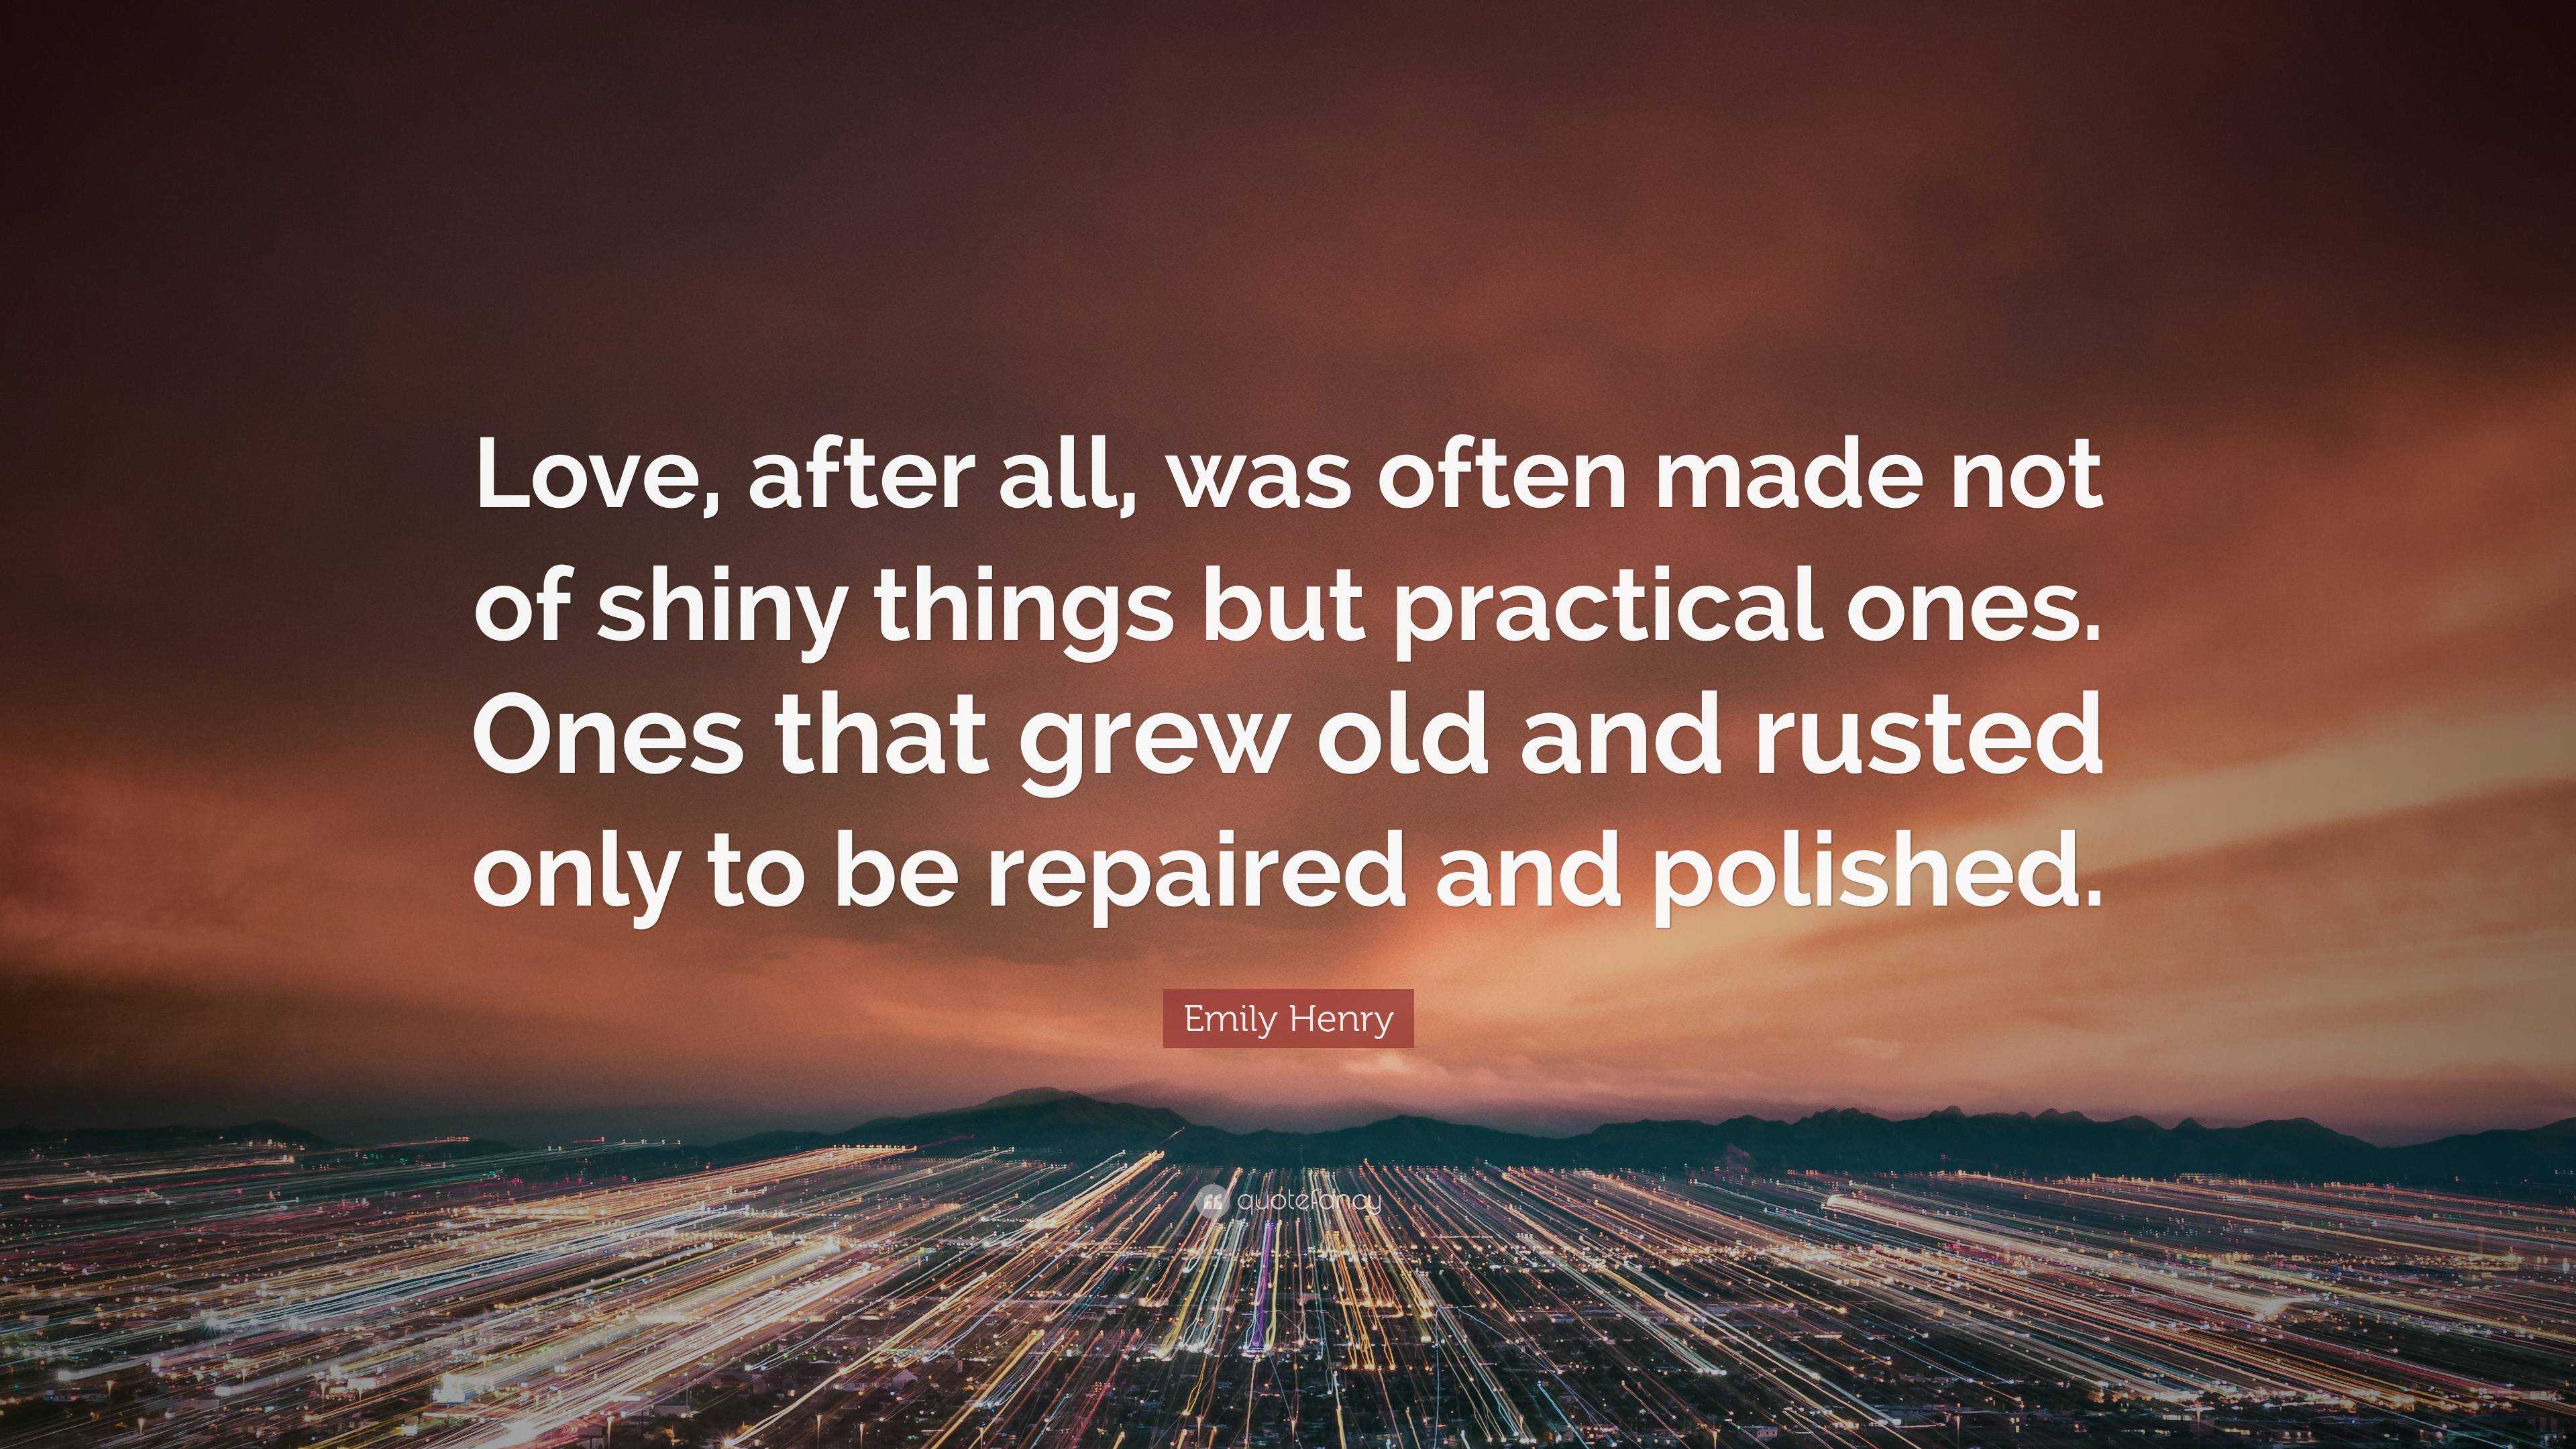 Emily Henry Quote: “Love, after all, was often made not of shiny things ...